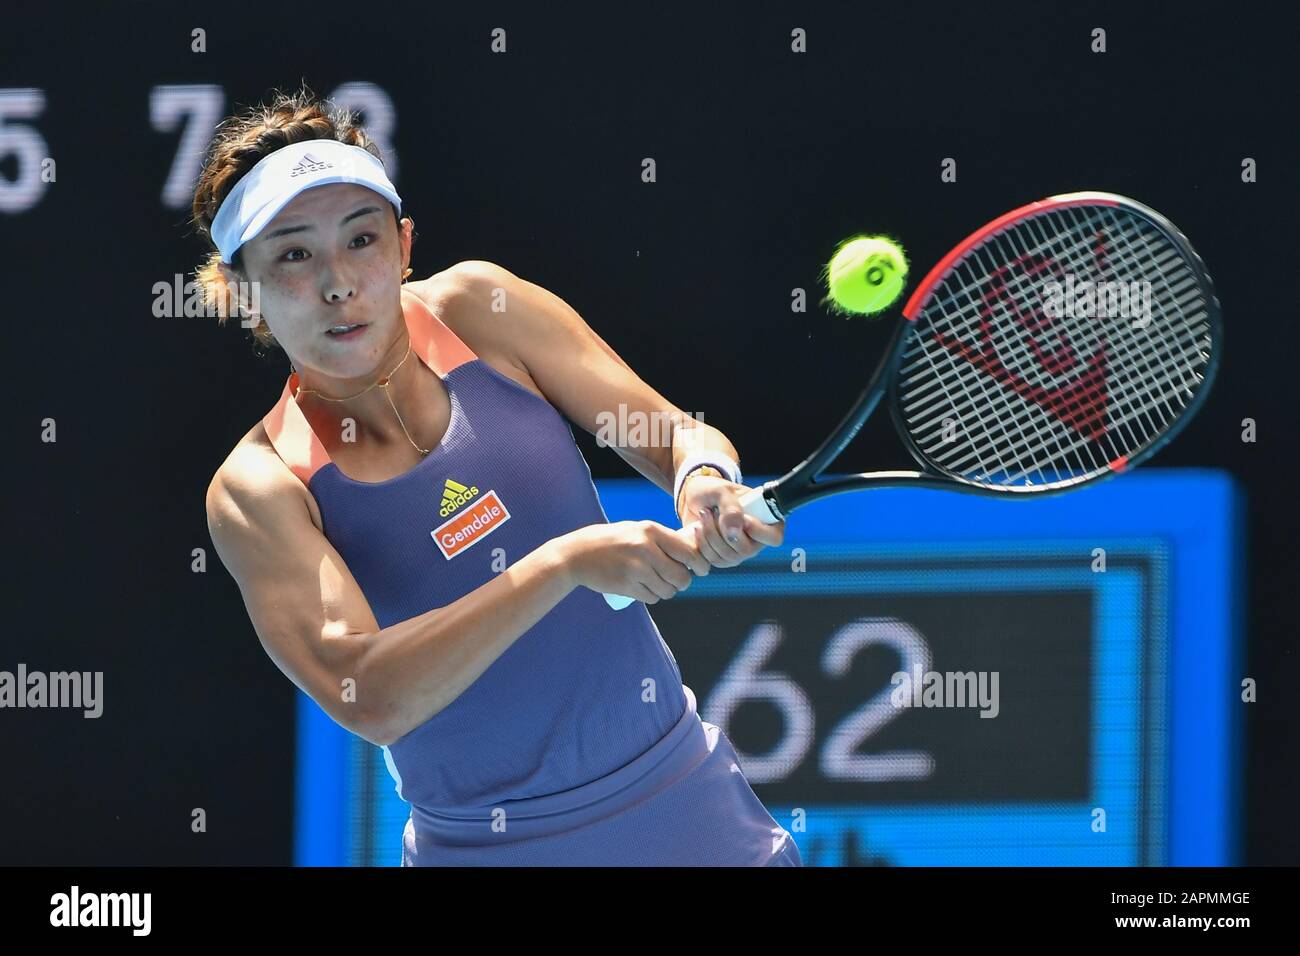 Melbourne, Australia. 24th Jan, 2020. 27th seed QIANG WANG (CHN) in action against 8th seed SERENA WILLIAMS (USA) on Rod Laver Arena in a Women's Singles 3rd round match on day 5 of the Australian Open 2020 in Melbourne, Australia. Sydney Low/Cal Sport Media. WANG won 64 67 75. Credit: csm/Alamy Live News Stock Photo